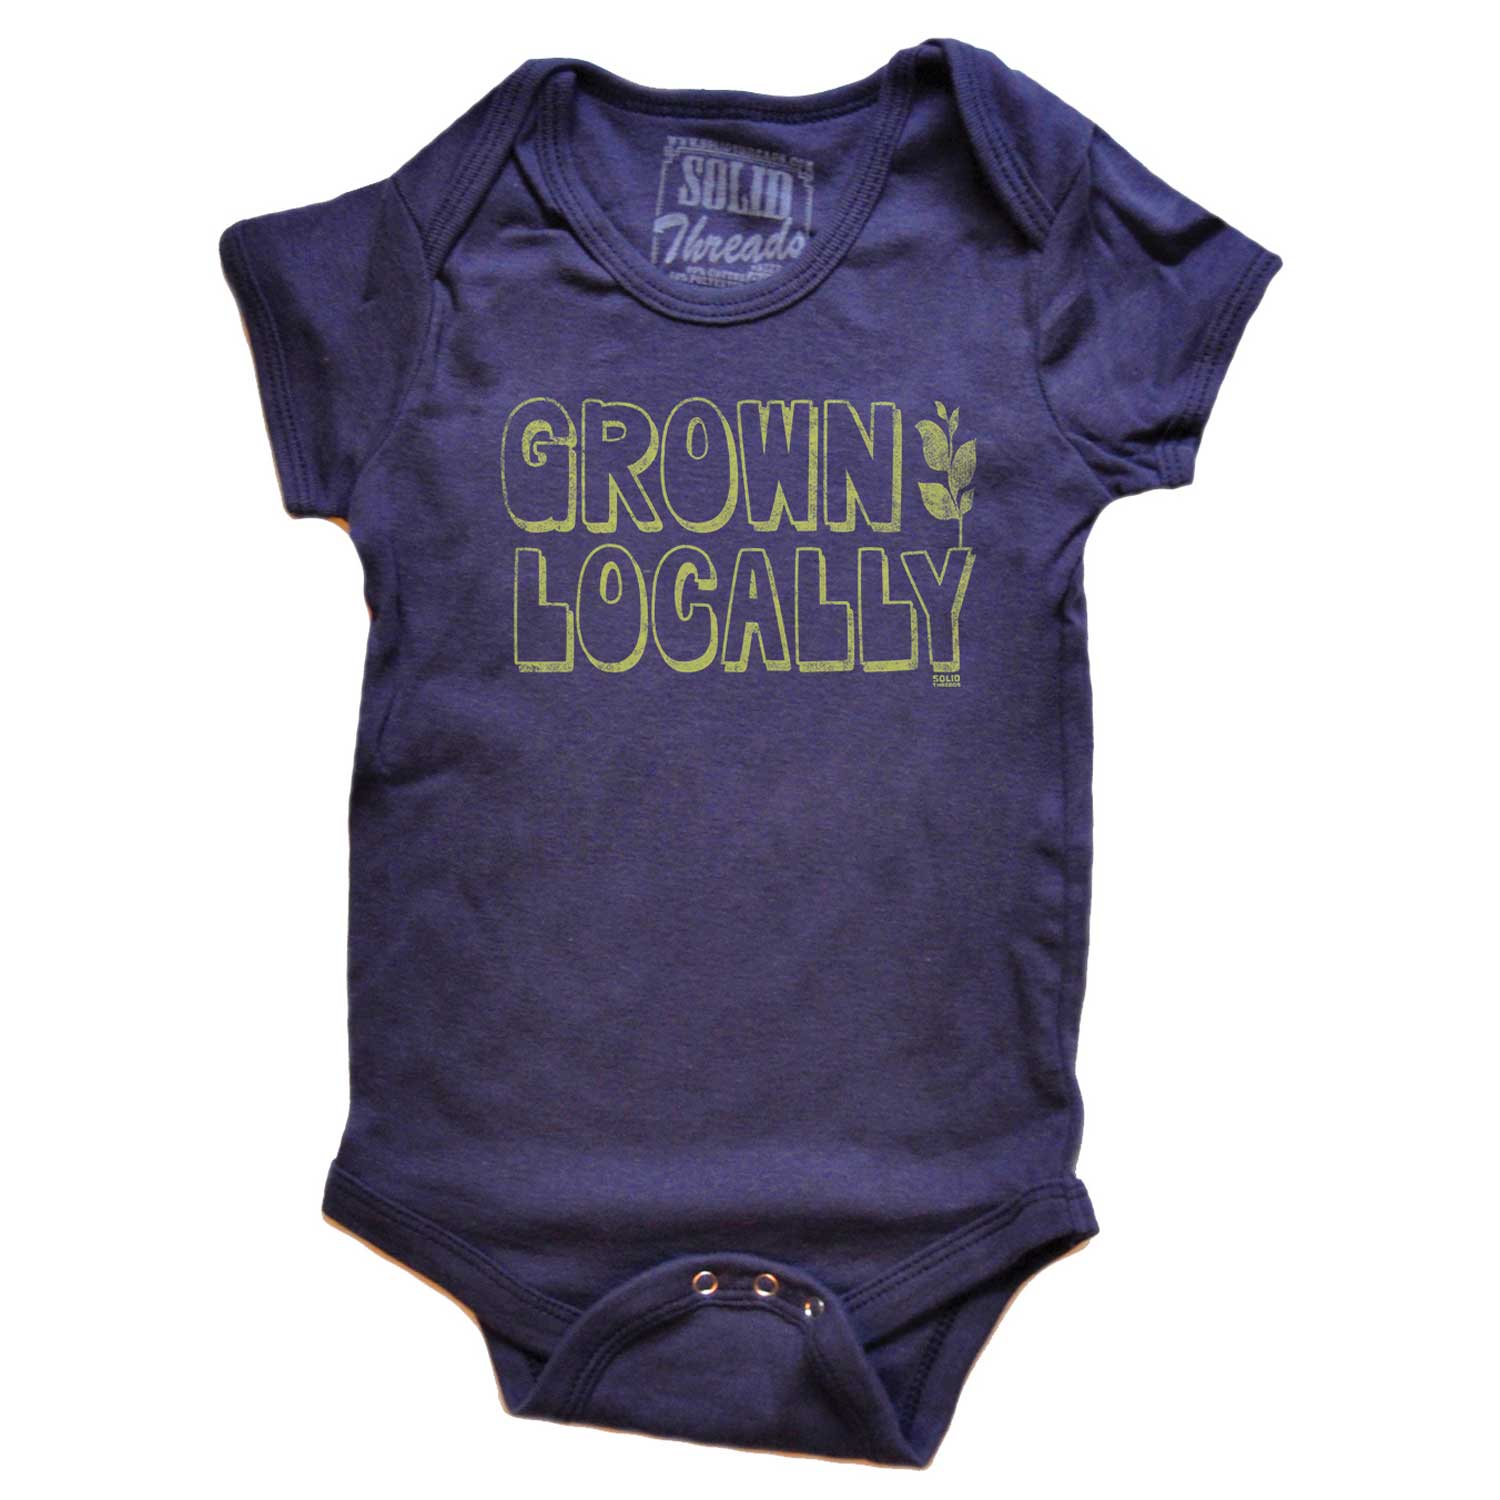 Baby Grown Locally Cool Harvest Graphic One Piece | Retro Organic Farming Romper | Solid Threads